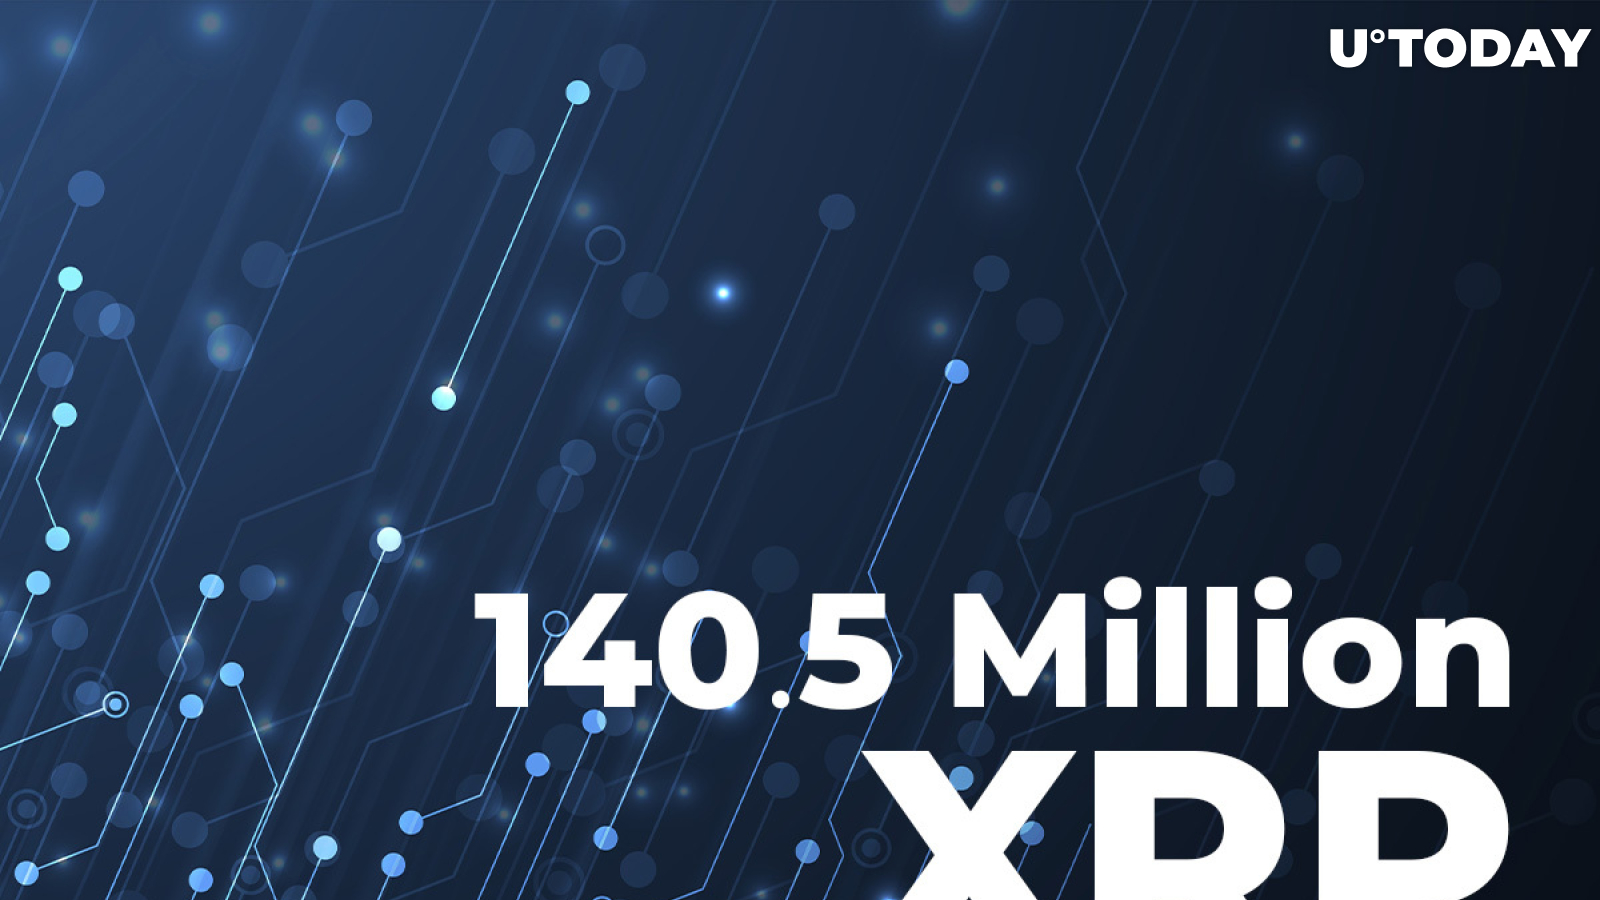 140.5 Million XRP Shifted By Ripple and Its ODL Platform, While XRP Sits at $0.86